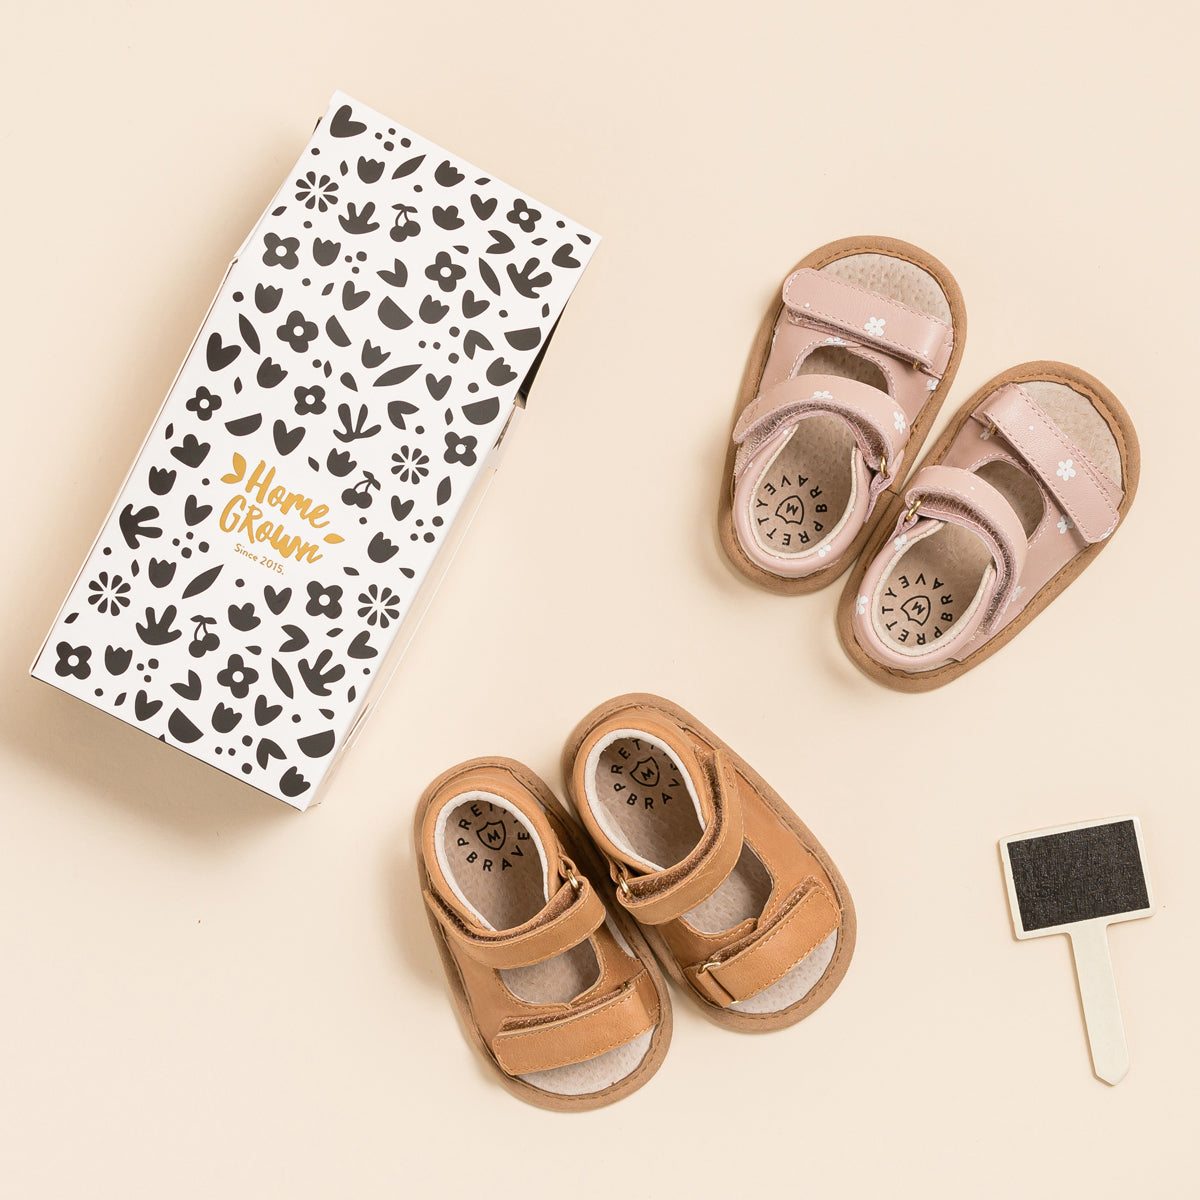 Two pairs of baby sandals next to cardboard box